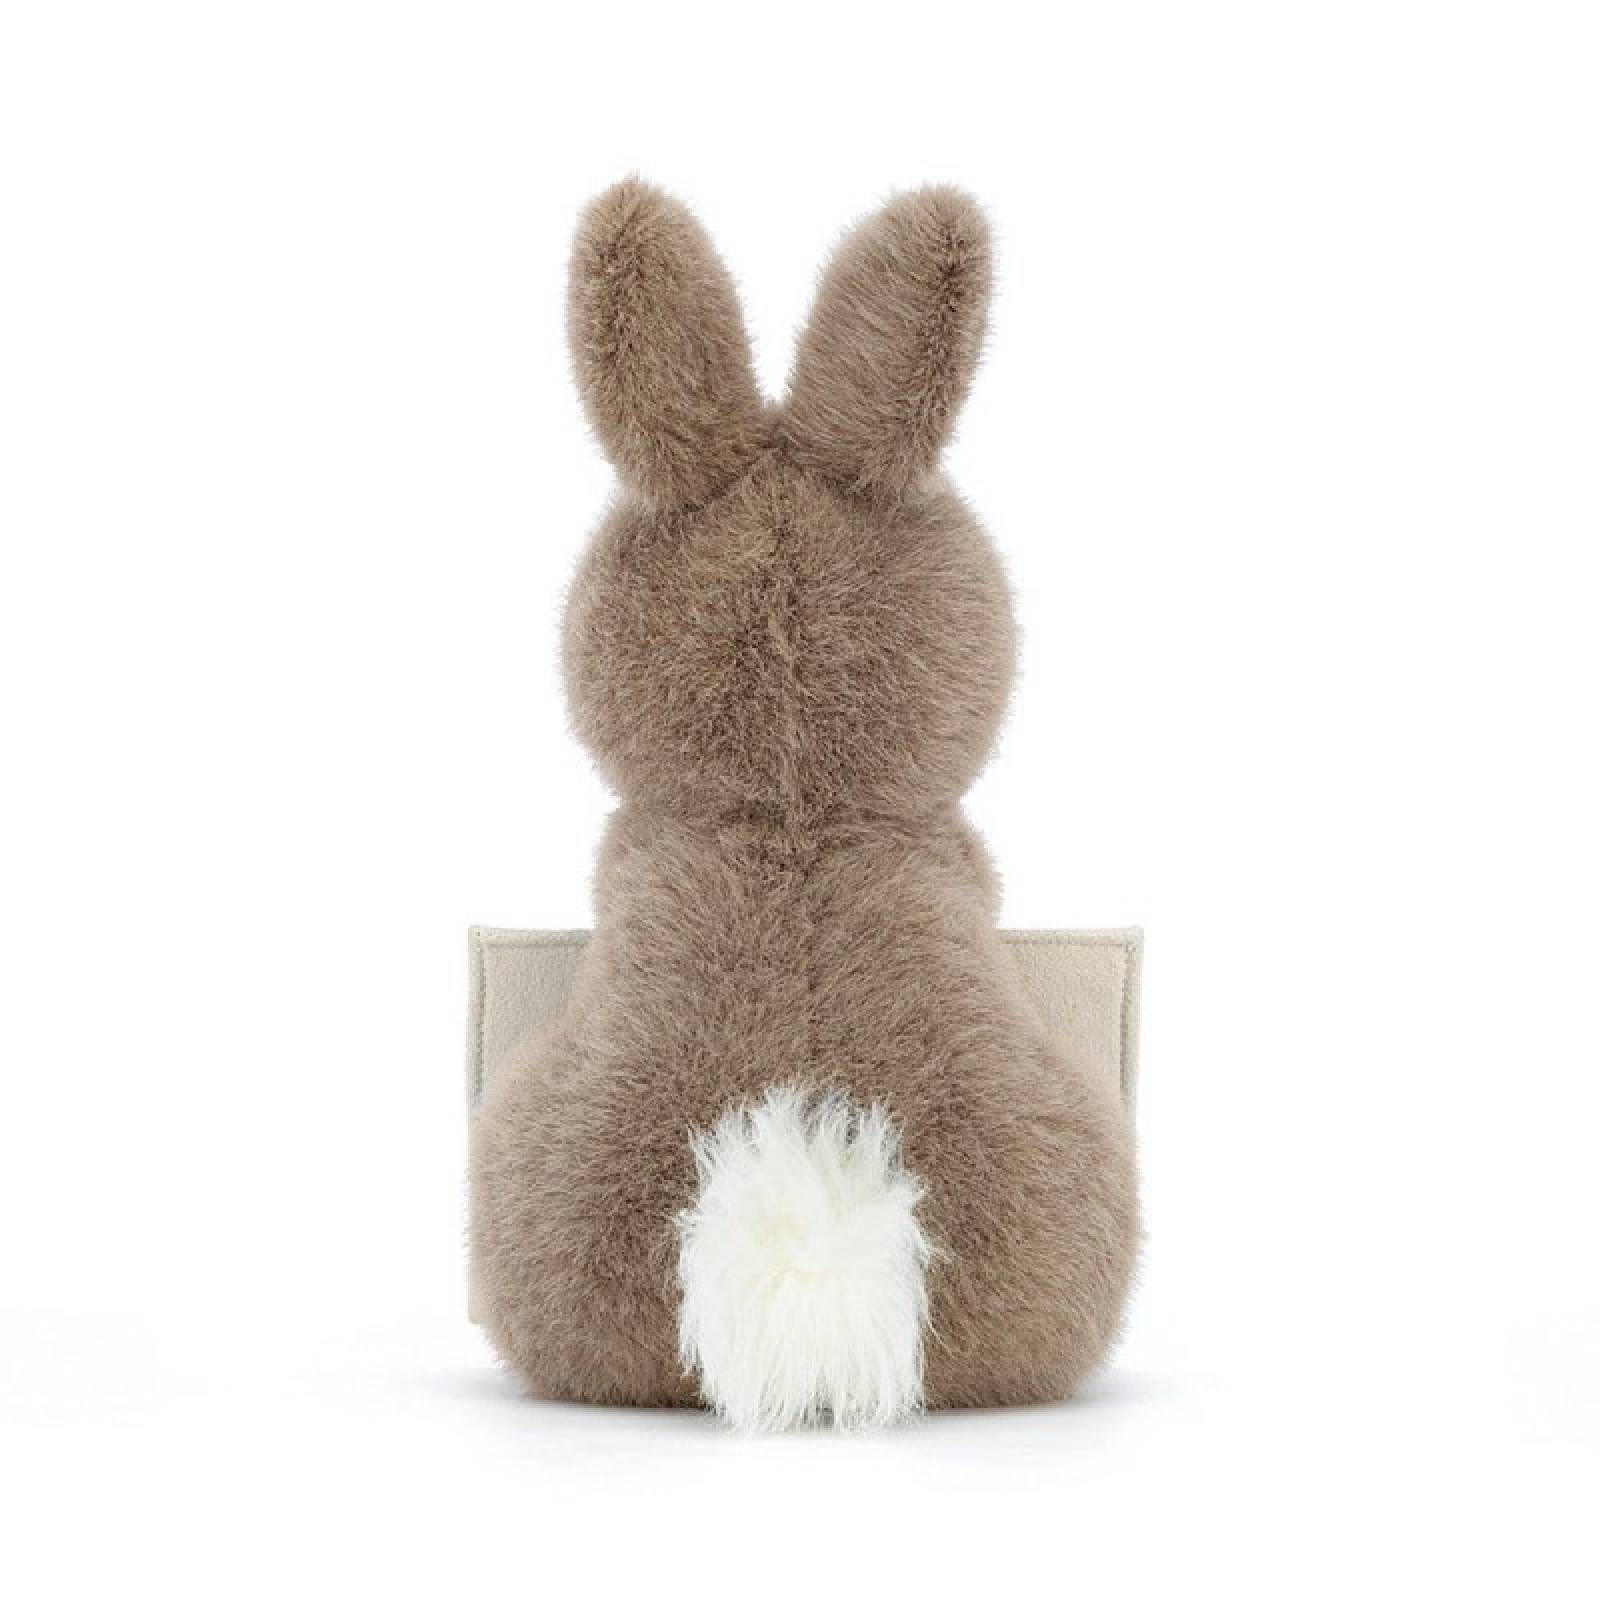 Messenger Bunny Soft Toy By Jellycat 1+ thumbnails